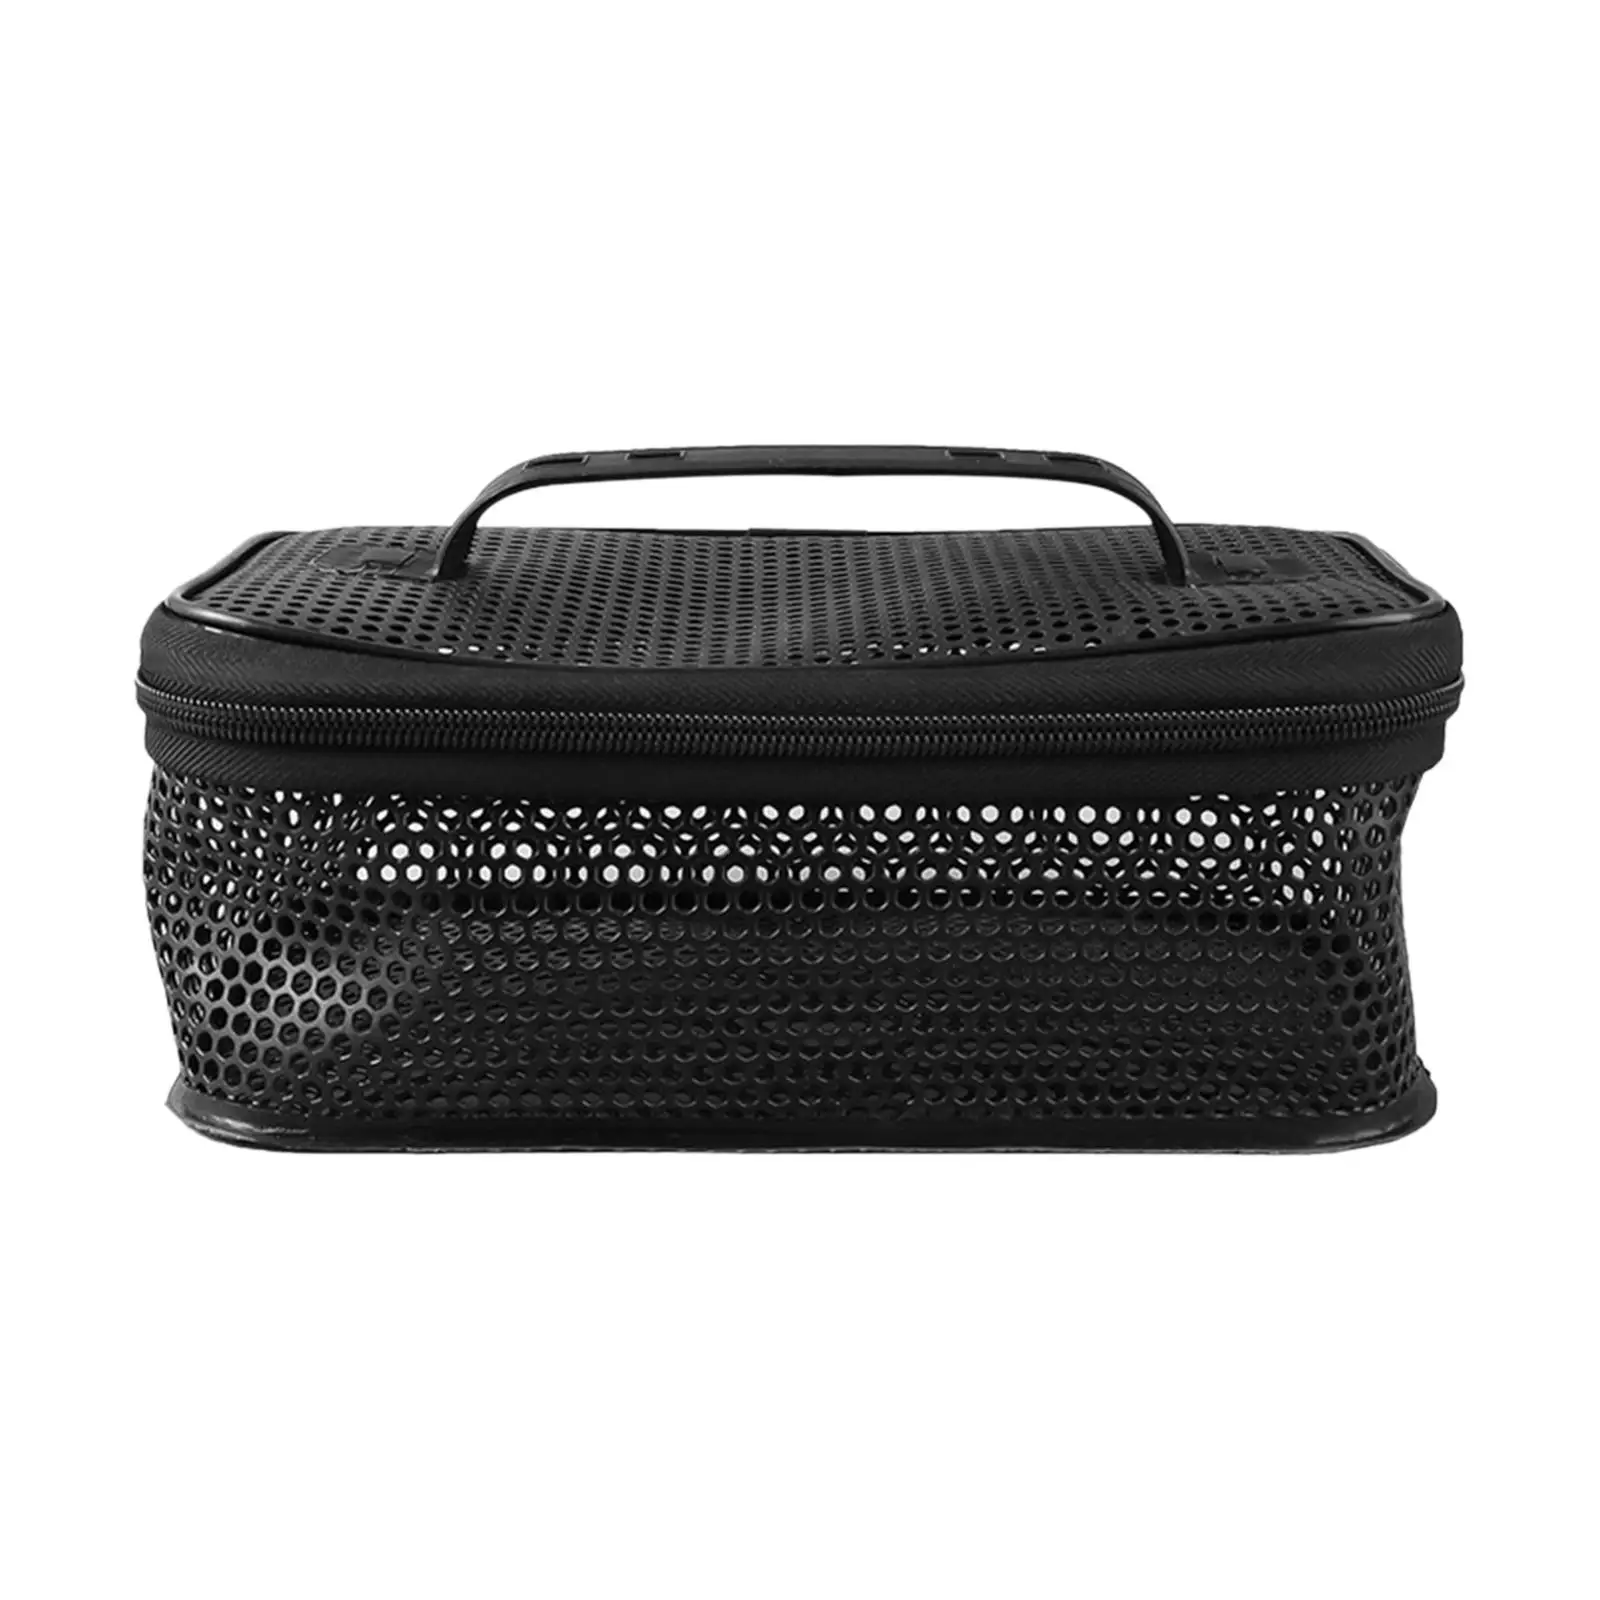 Tackle Carry Case Sturdy Outdoor Fishing Accessories Wear Resistant Mesh Container Fishing Bait Bag Hollowed Out Lure Pouch